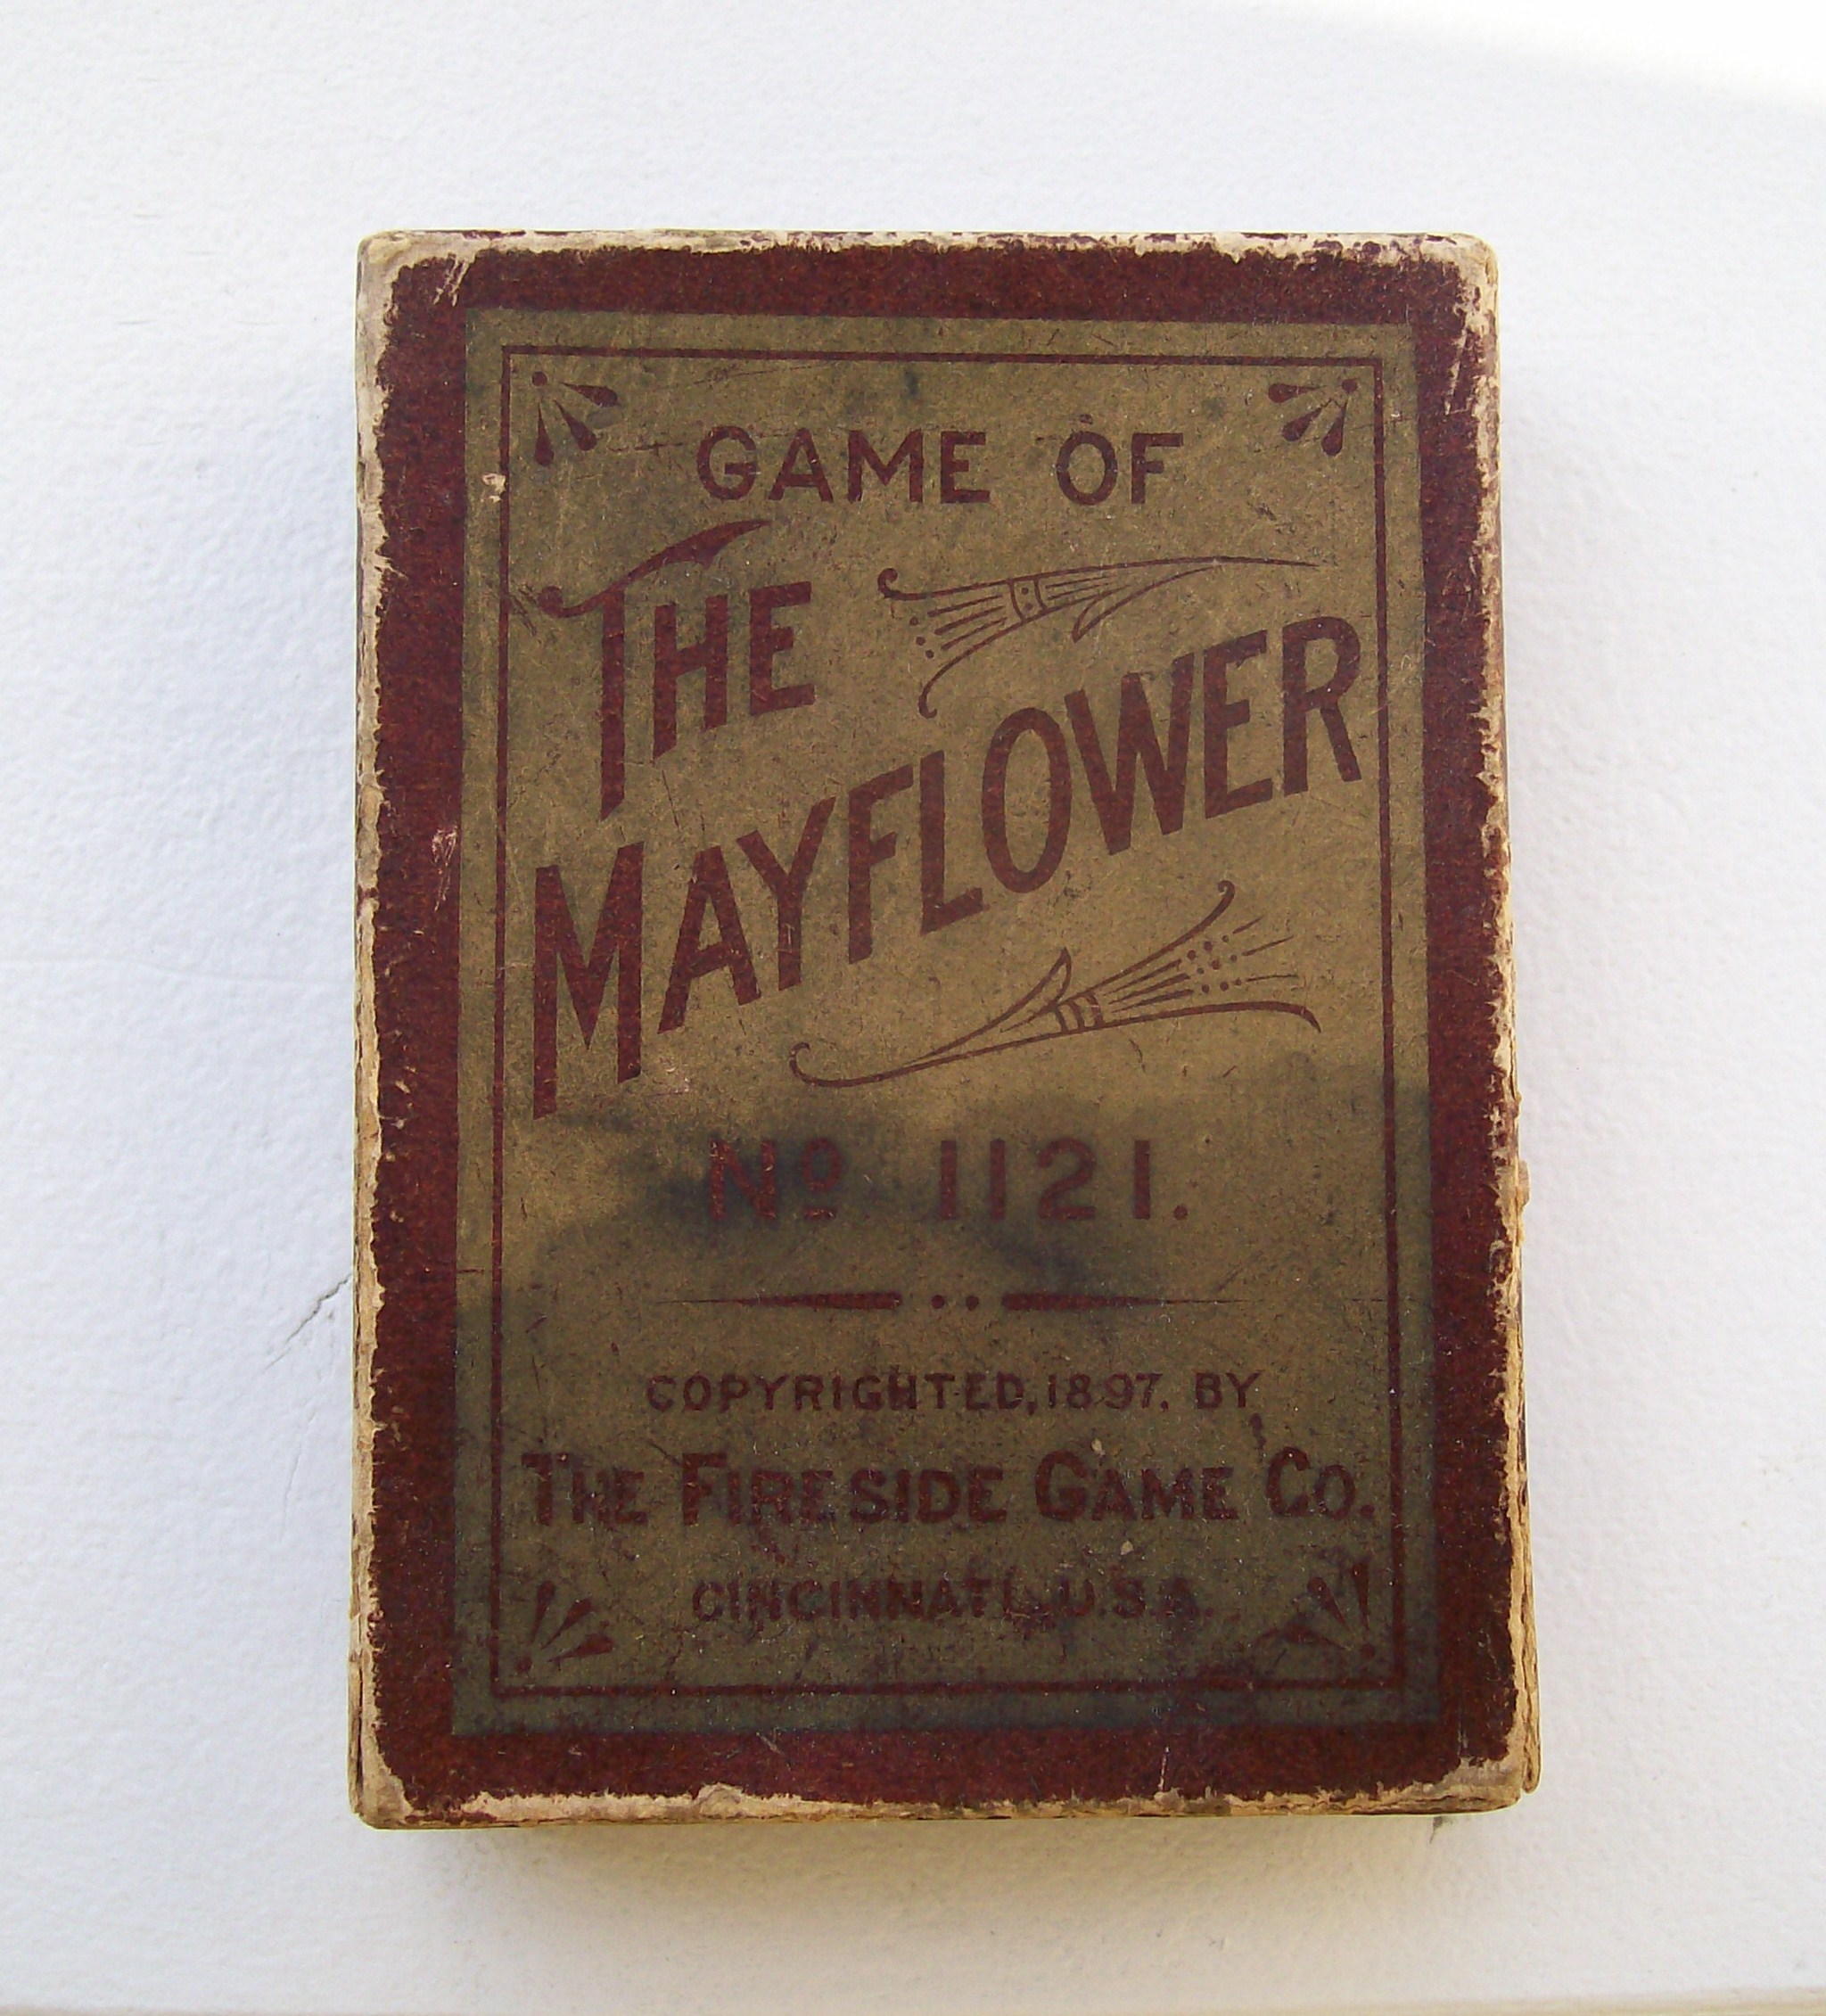 Historical images of Plymouth in the Old Card Game of The Mayflower